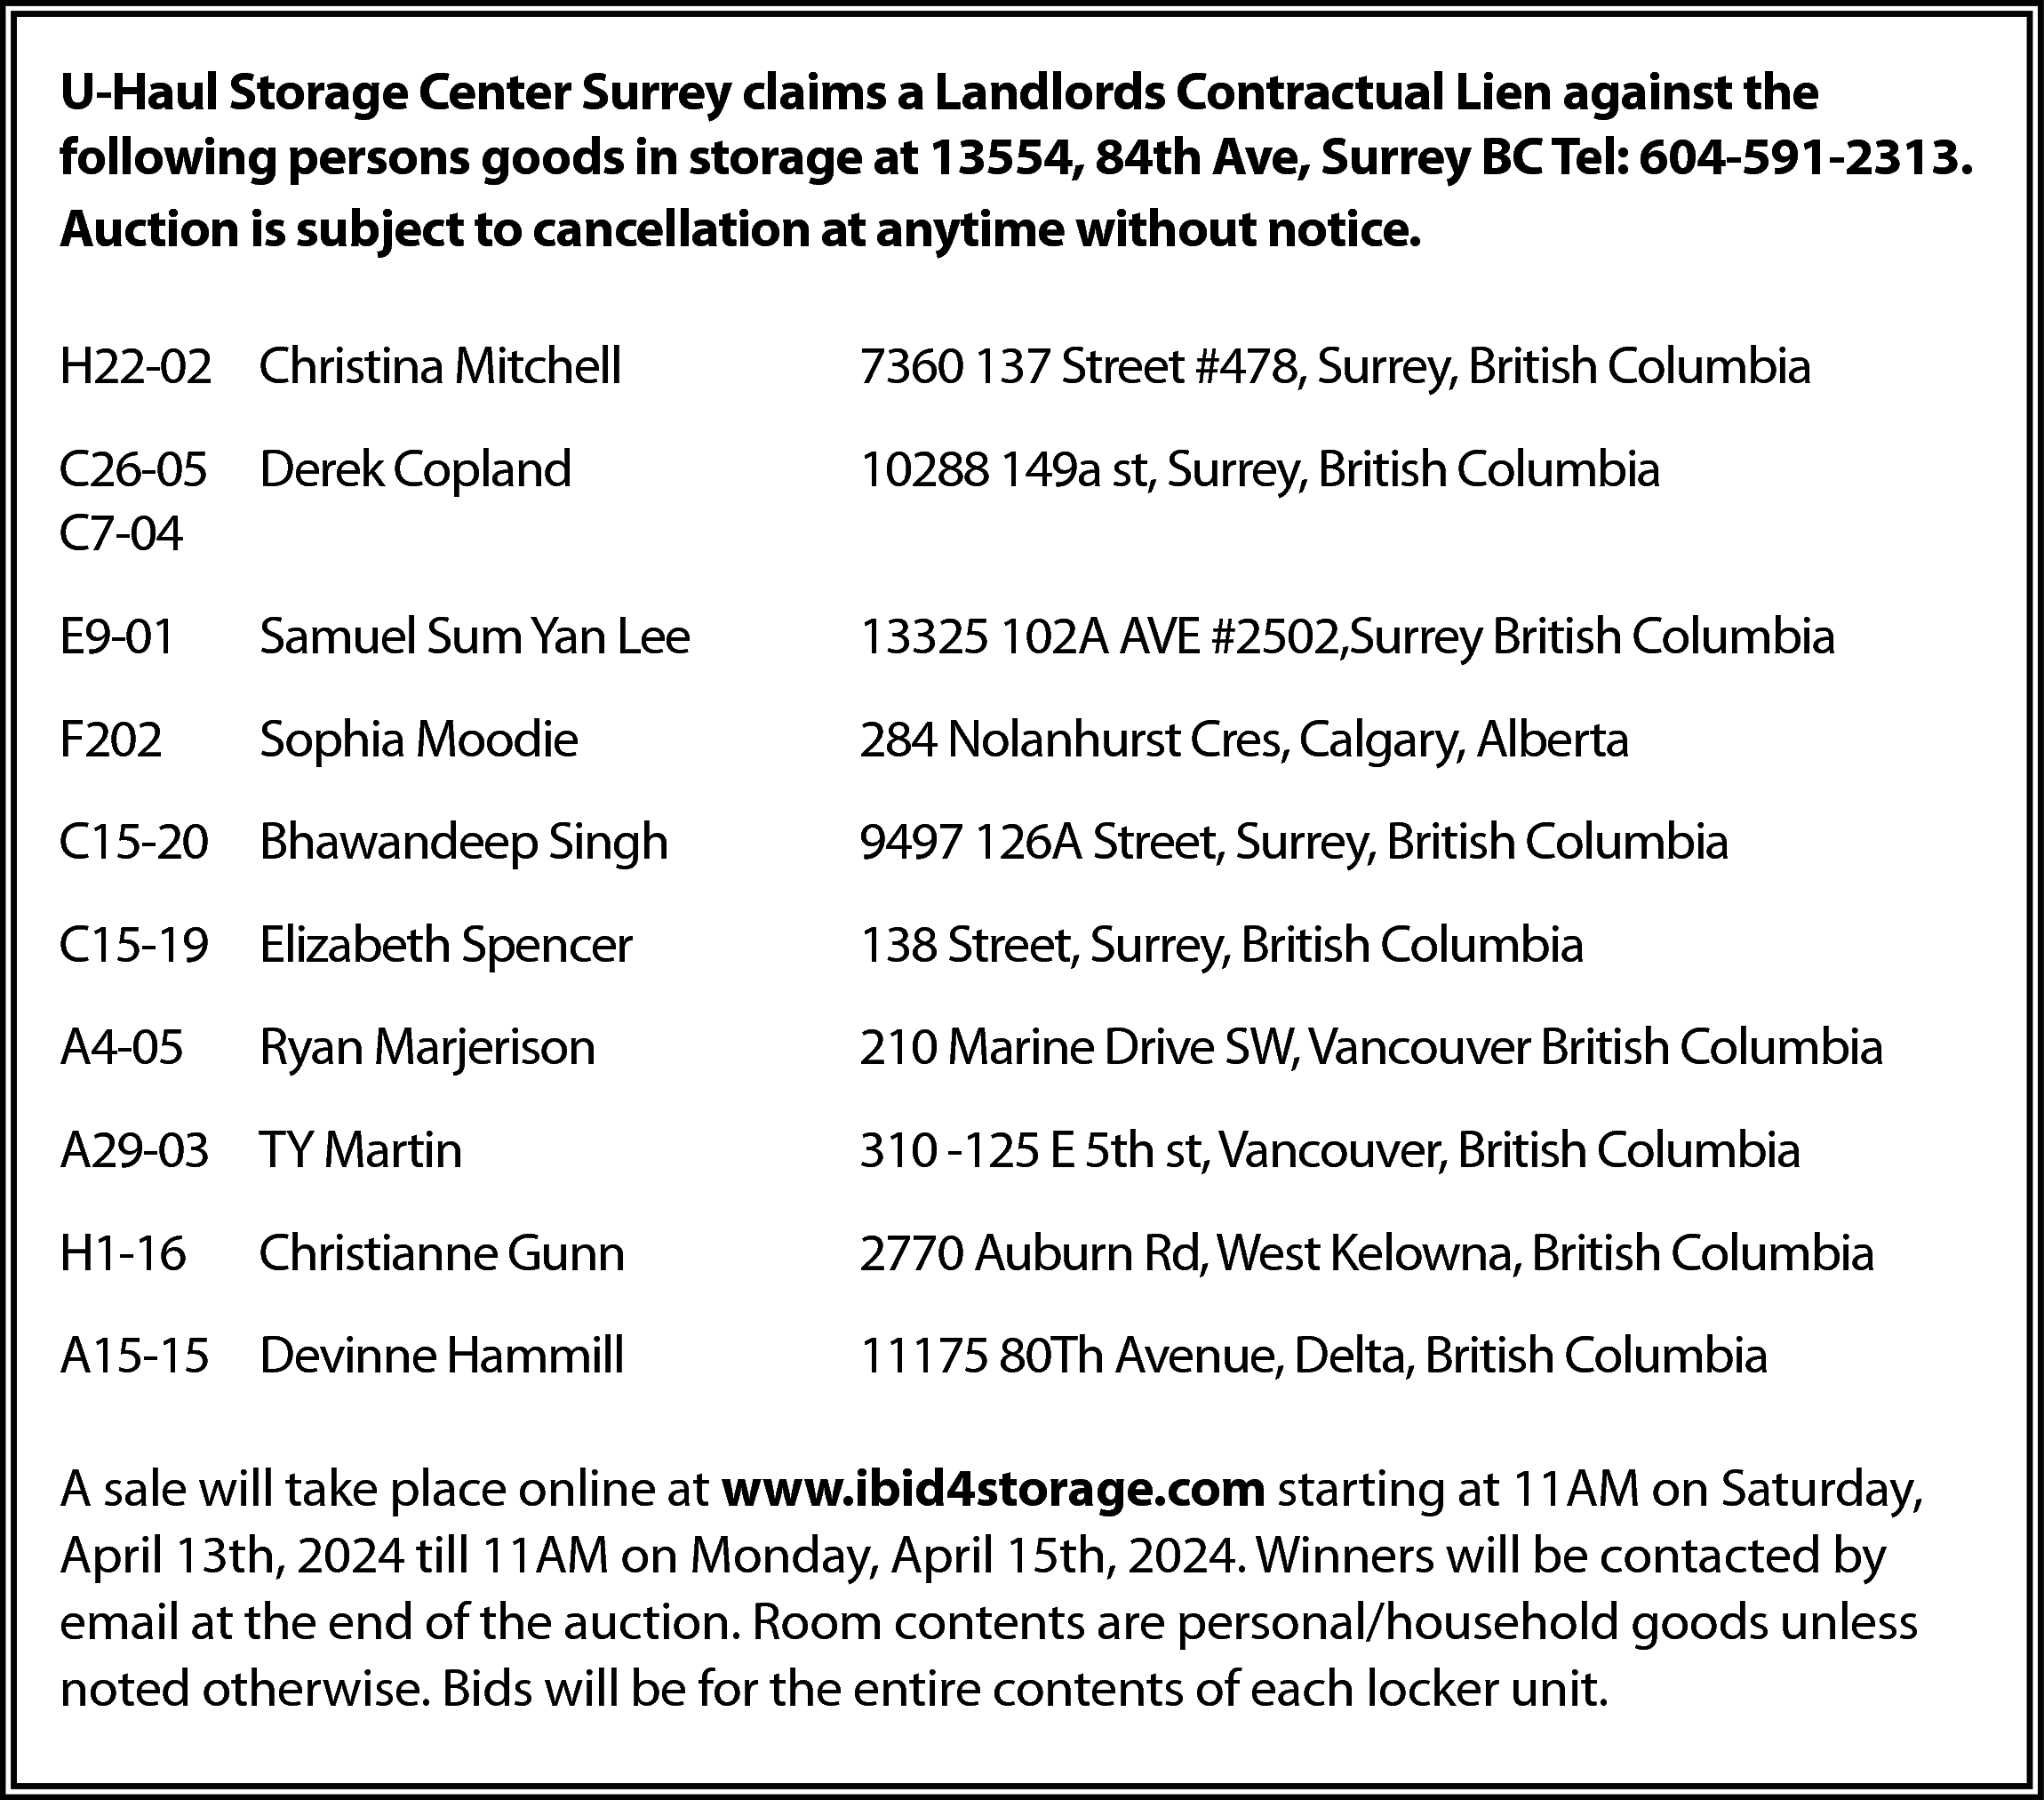 U-Haul Storage Center Surrey claims  U-Haul Storage Center Surrey claims a Landlords Contractual Lien against the  following persons goods in storage at 13554, 84th Ave, Surrey BC Tel: 604-591-2313.  Auction is subject to cancellation at anytime without notice.  H22-02 Christina Mitchell    7360 137 Street #478, Surrey, British Columbia    C26-05 Derek Copland  C7-04    10288 149a st, Surrey, British Columbia    E9-01    Samuel Sum Yan Lee    13325 102A AVE #2502,Surrey British Columbia    F202    Sophia Moodie    284 Nolanhurst Cres, Calgary, Alberta    C15-20 Bhawandeep Singh    9497 126A Street, Surrey, British Columbia    C15-19 Elizabeth Spencer    138 Street, Surrey, British Columbia    A4-05    210 Marine Drive SW, Vancouver British Columbia    Ryan Marjerison    A29-03 TY Martin    310 -125 E 5th st, Vancouver, British Columbia    H1-16    2770 Auburn Rd, West Kelowna, British Columbia    Christianne Gunn    A15-15 Devinne Hammill    11175 80Th Avenue, Delta, British Columbia    A sale will take place online at www.ibid4storage.com starting at 11AM on Saturday,  April 13th, 2024 till 11AM on Monday, April 15th, 2024. Winners will be contacted by  email at the end of the auction. Room contents are personal/household goods unless  noted otherwise. Bids will be for the entire contents of each locker unit.    